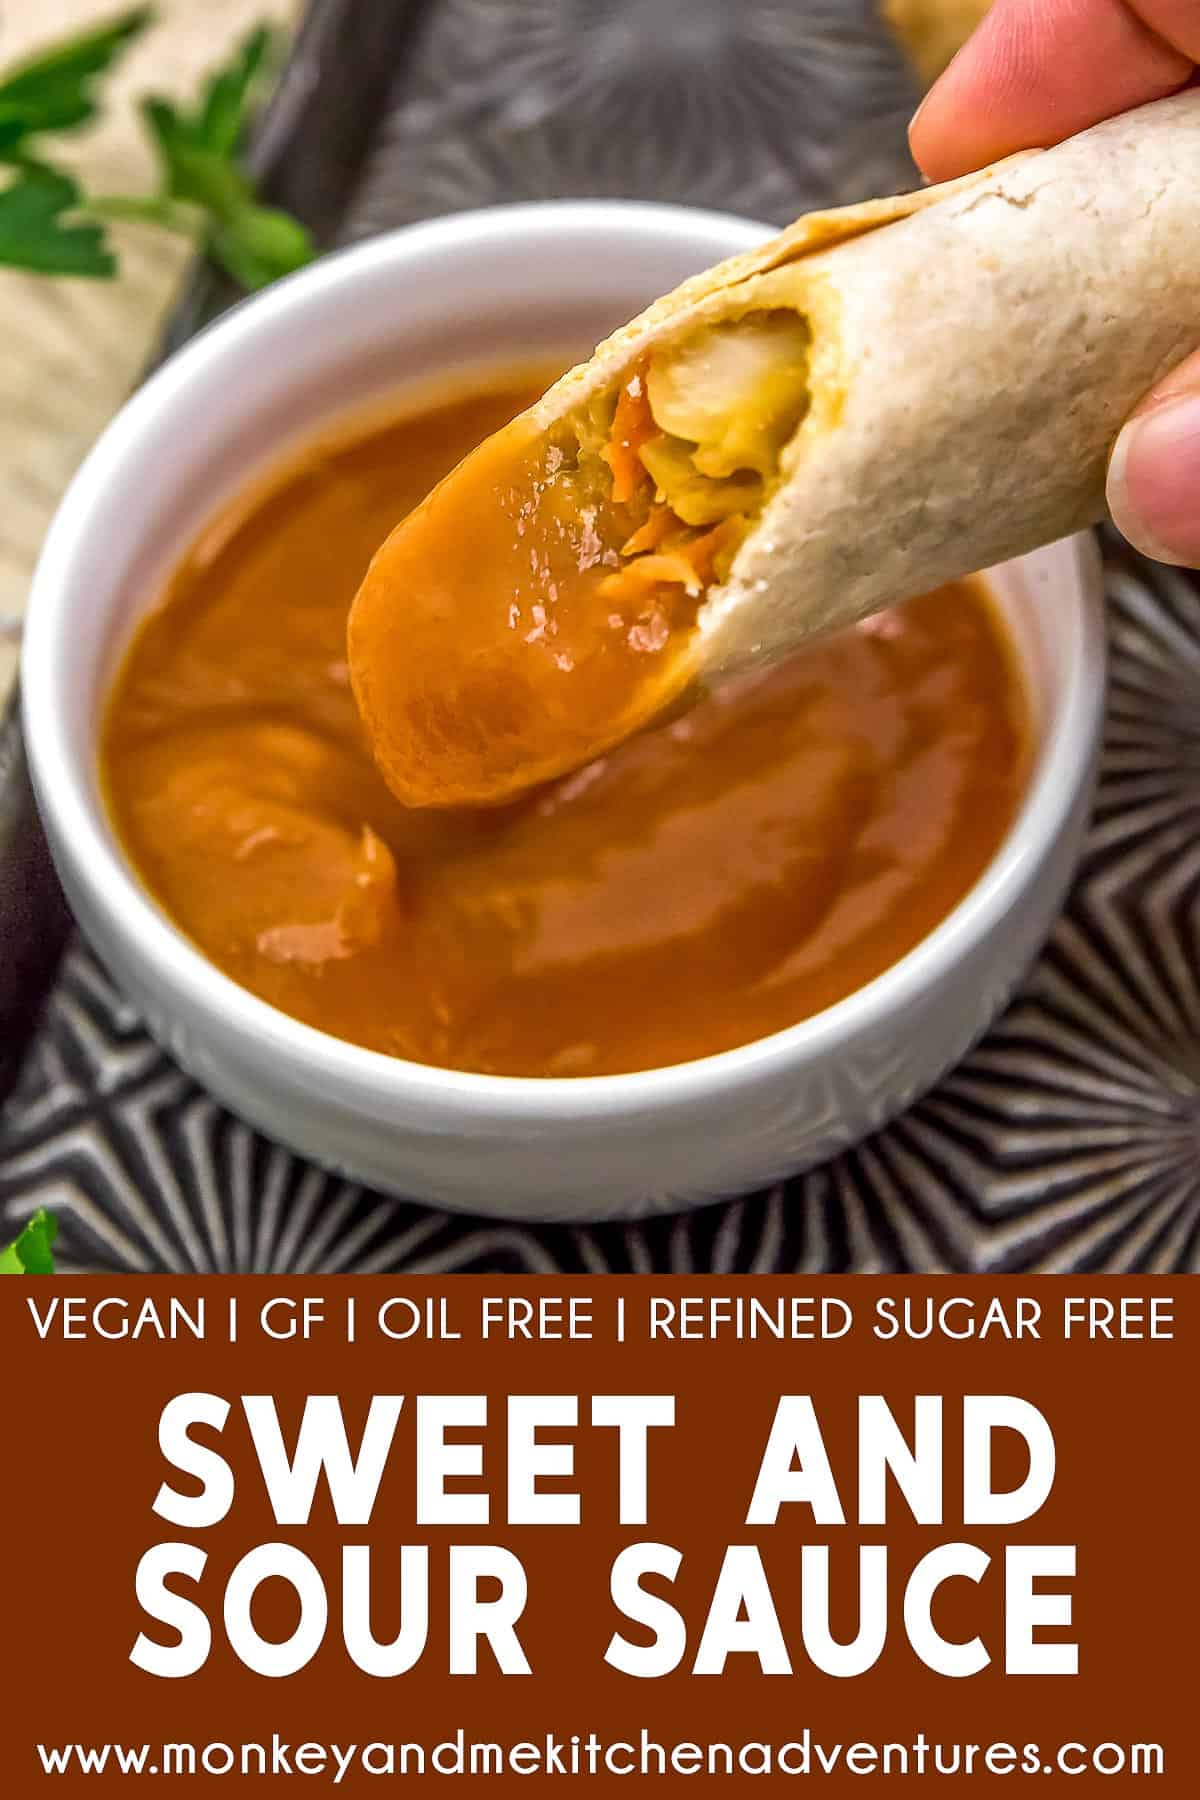 Sweet and Sour Sauce with text description